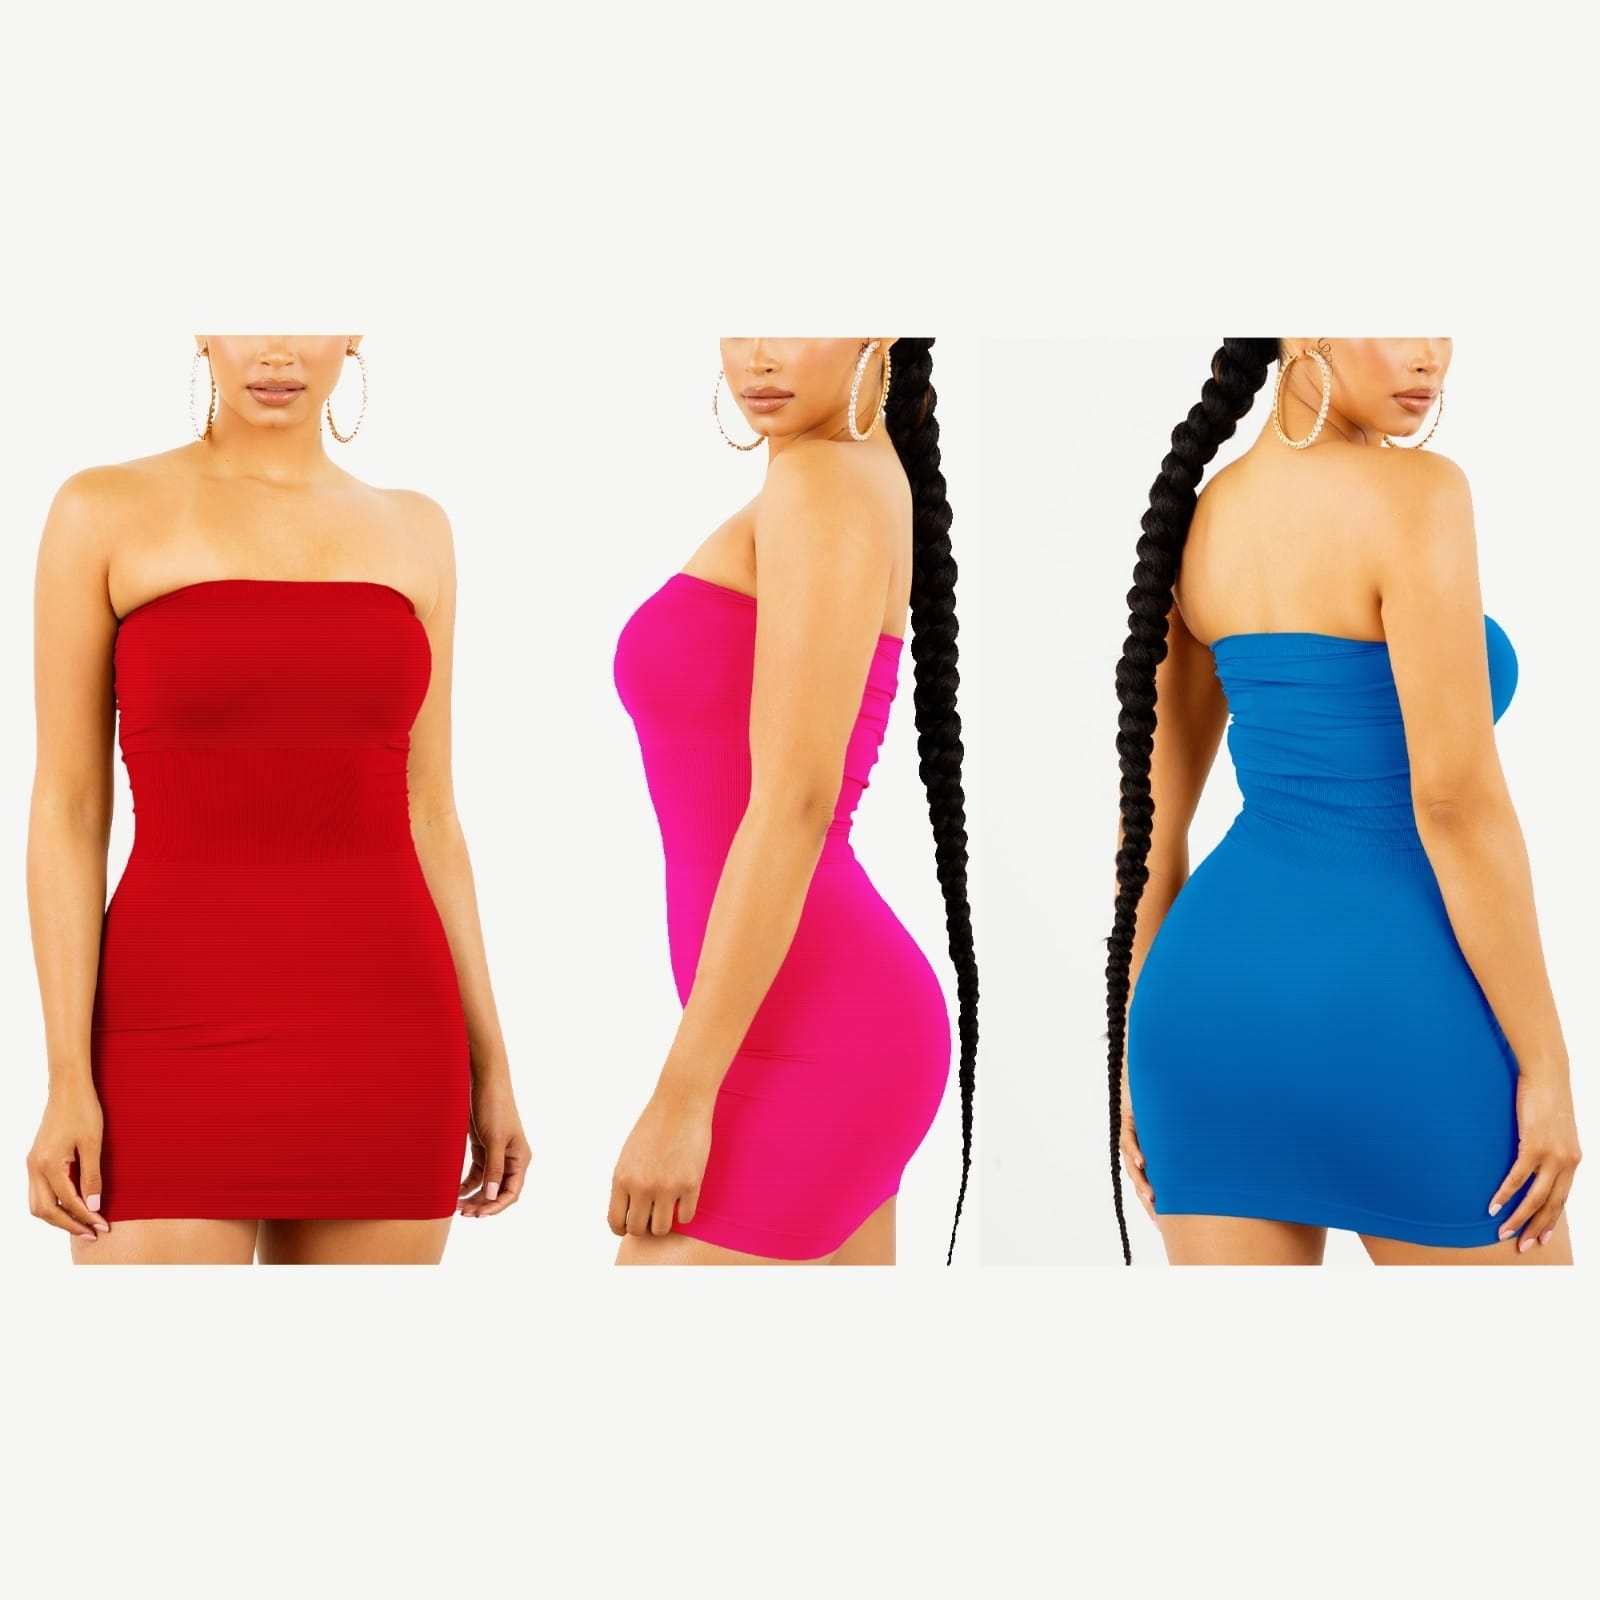 3-Pack Women's Strapless Stretchy Seamless Tight Fit Body Con Mini Tube Top Dress - RED, XL